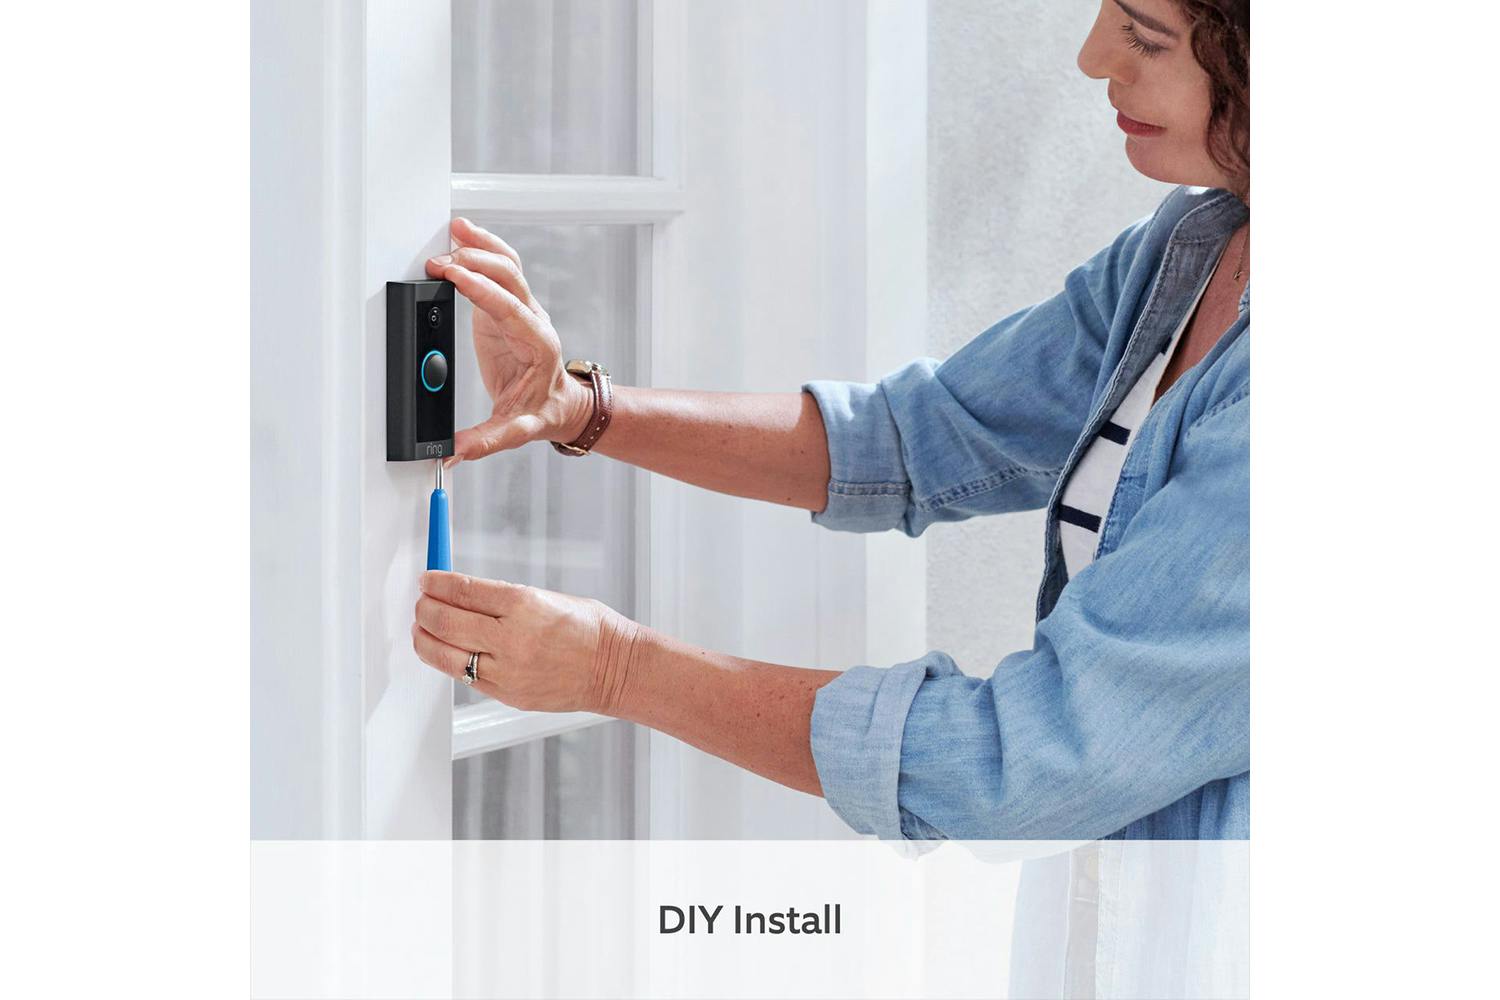 Ring Video Doorbell Wired | Black